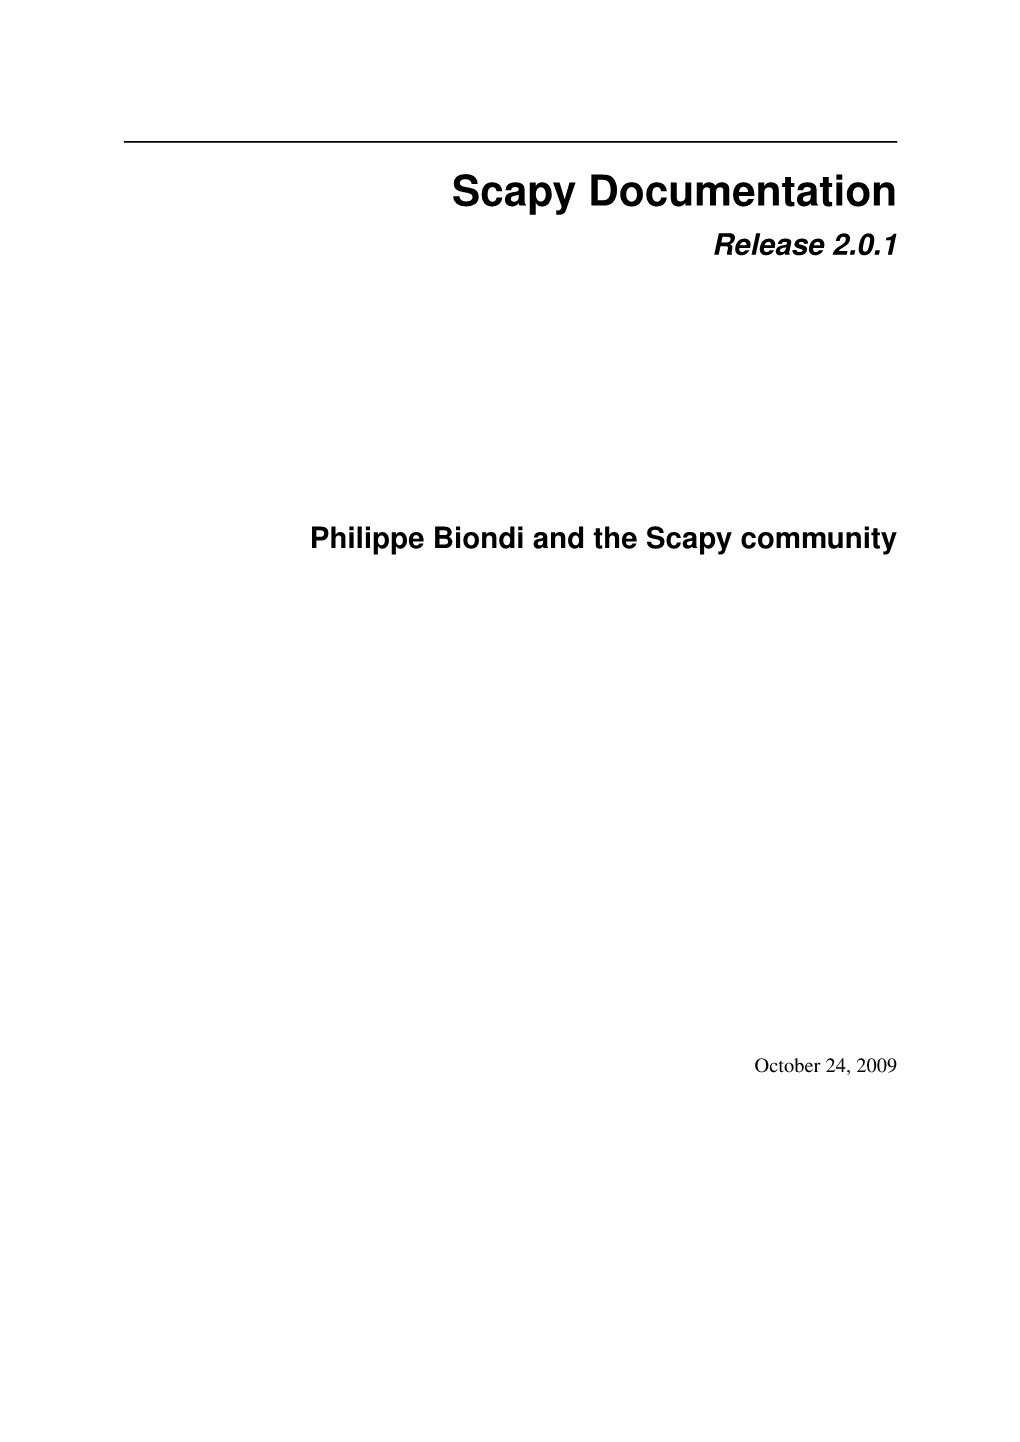 Scapy Documentation Release 2.0.1